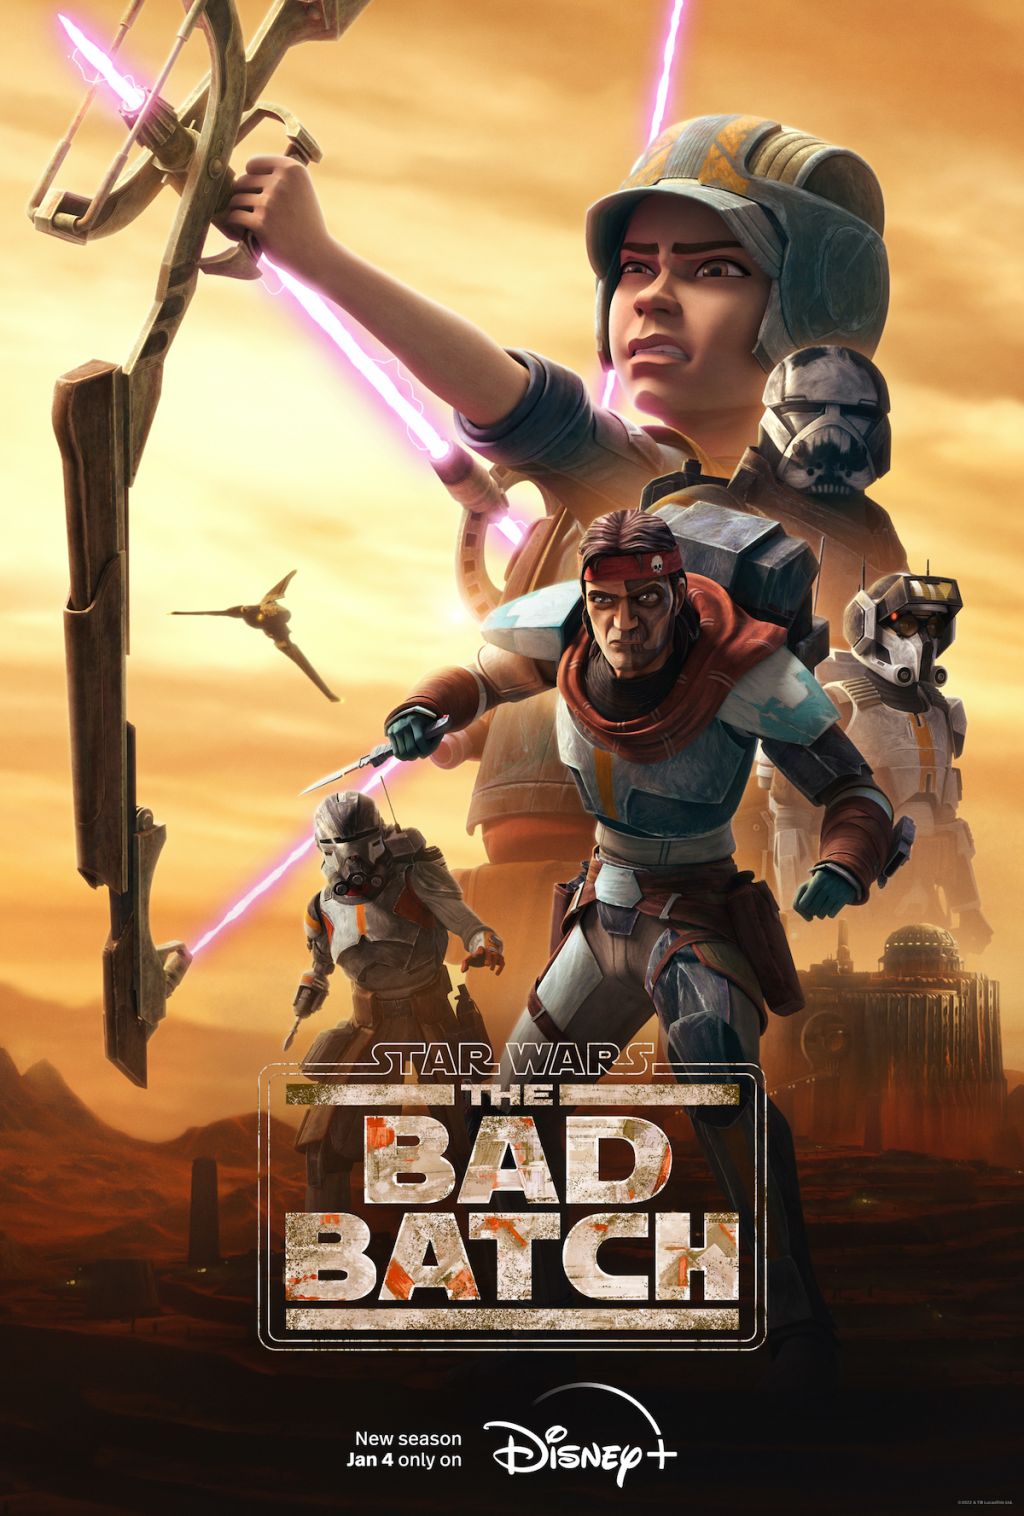 STAR WARS: THE BAD BATCH key art and still images